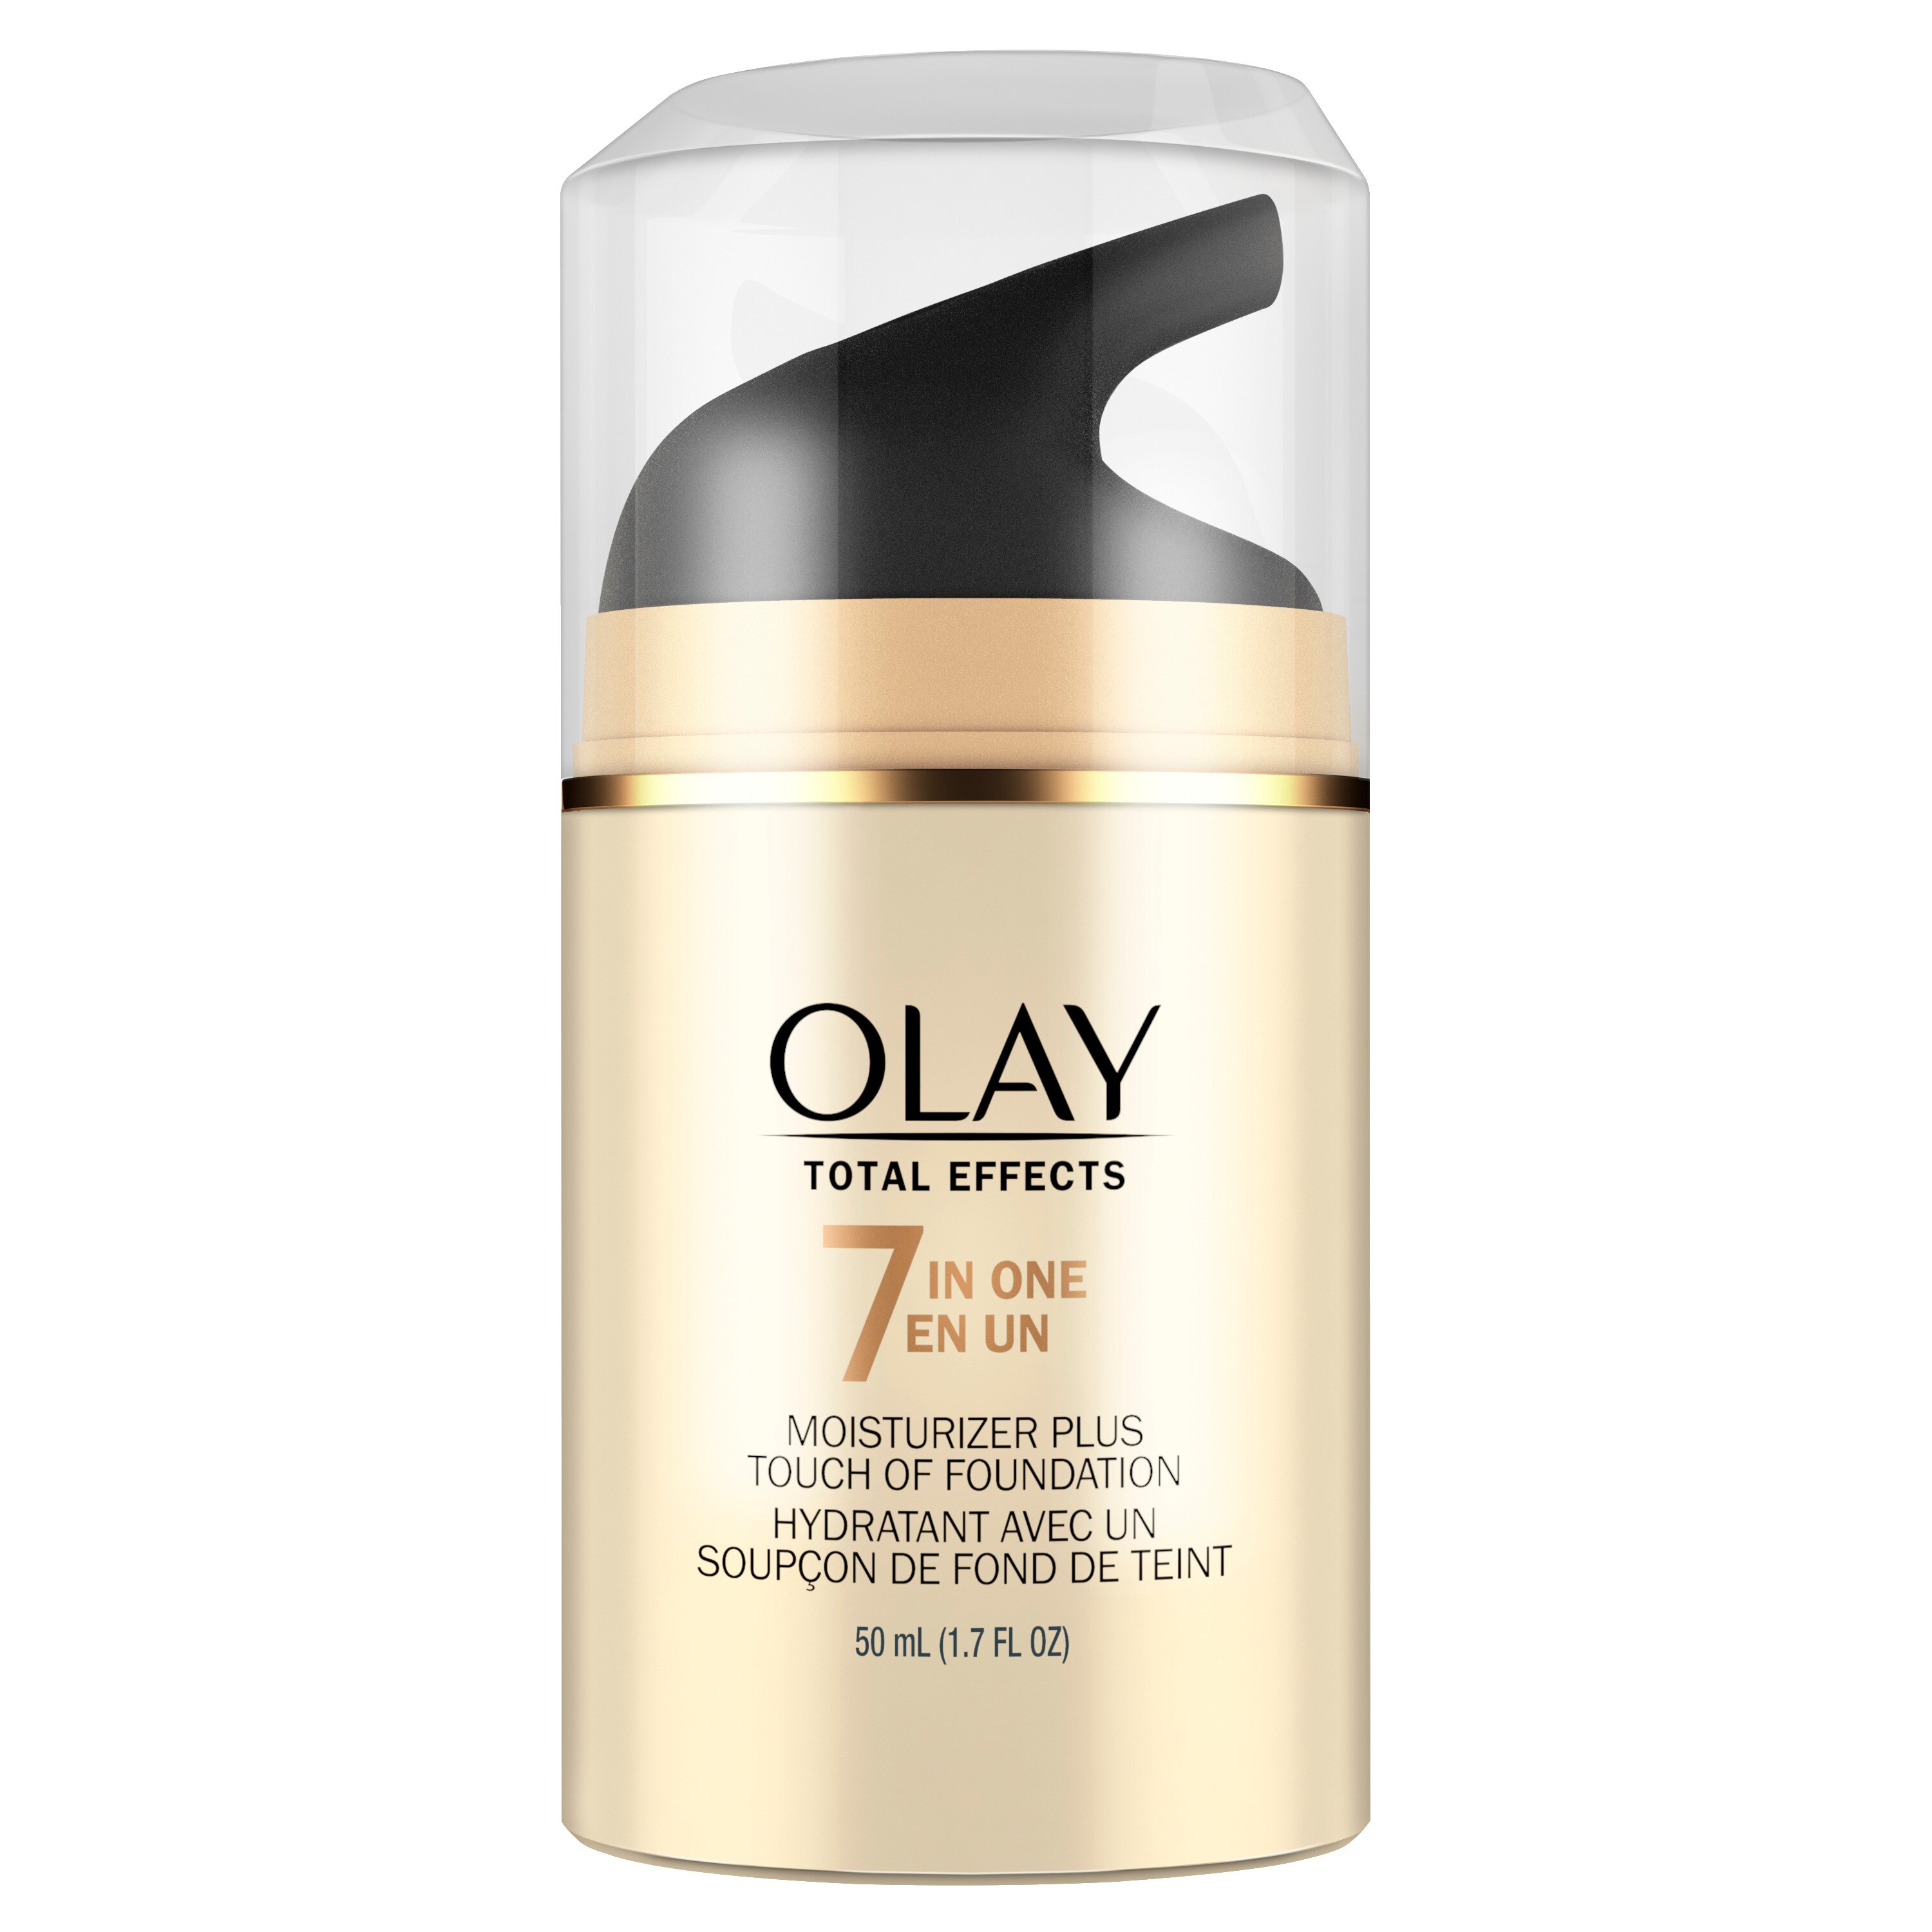 Olay CC Cream Total Effects Daily Moisturizer Plus Touch of Foundation, 1.7 OZ